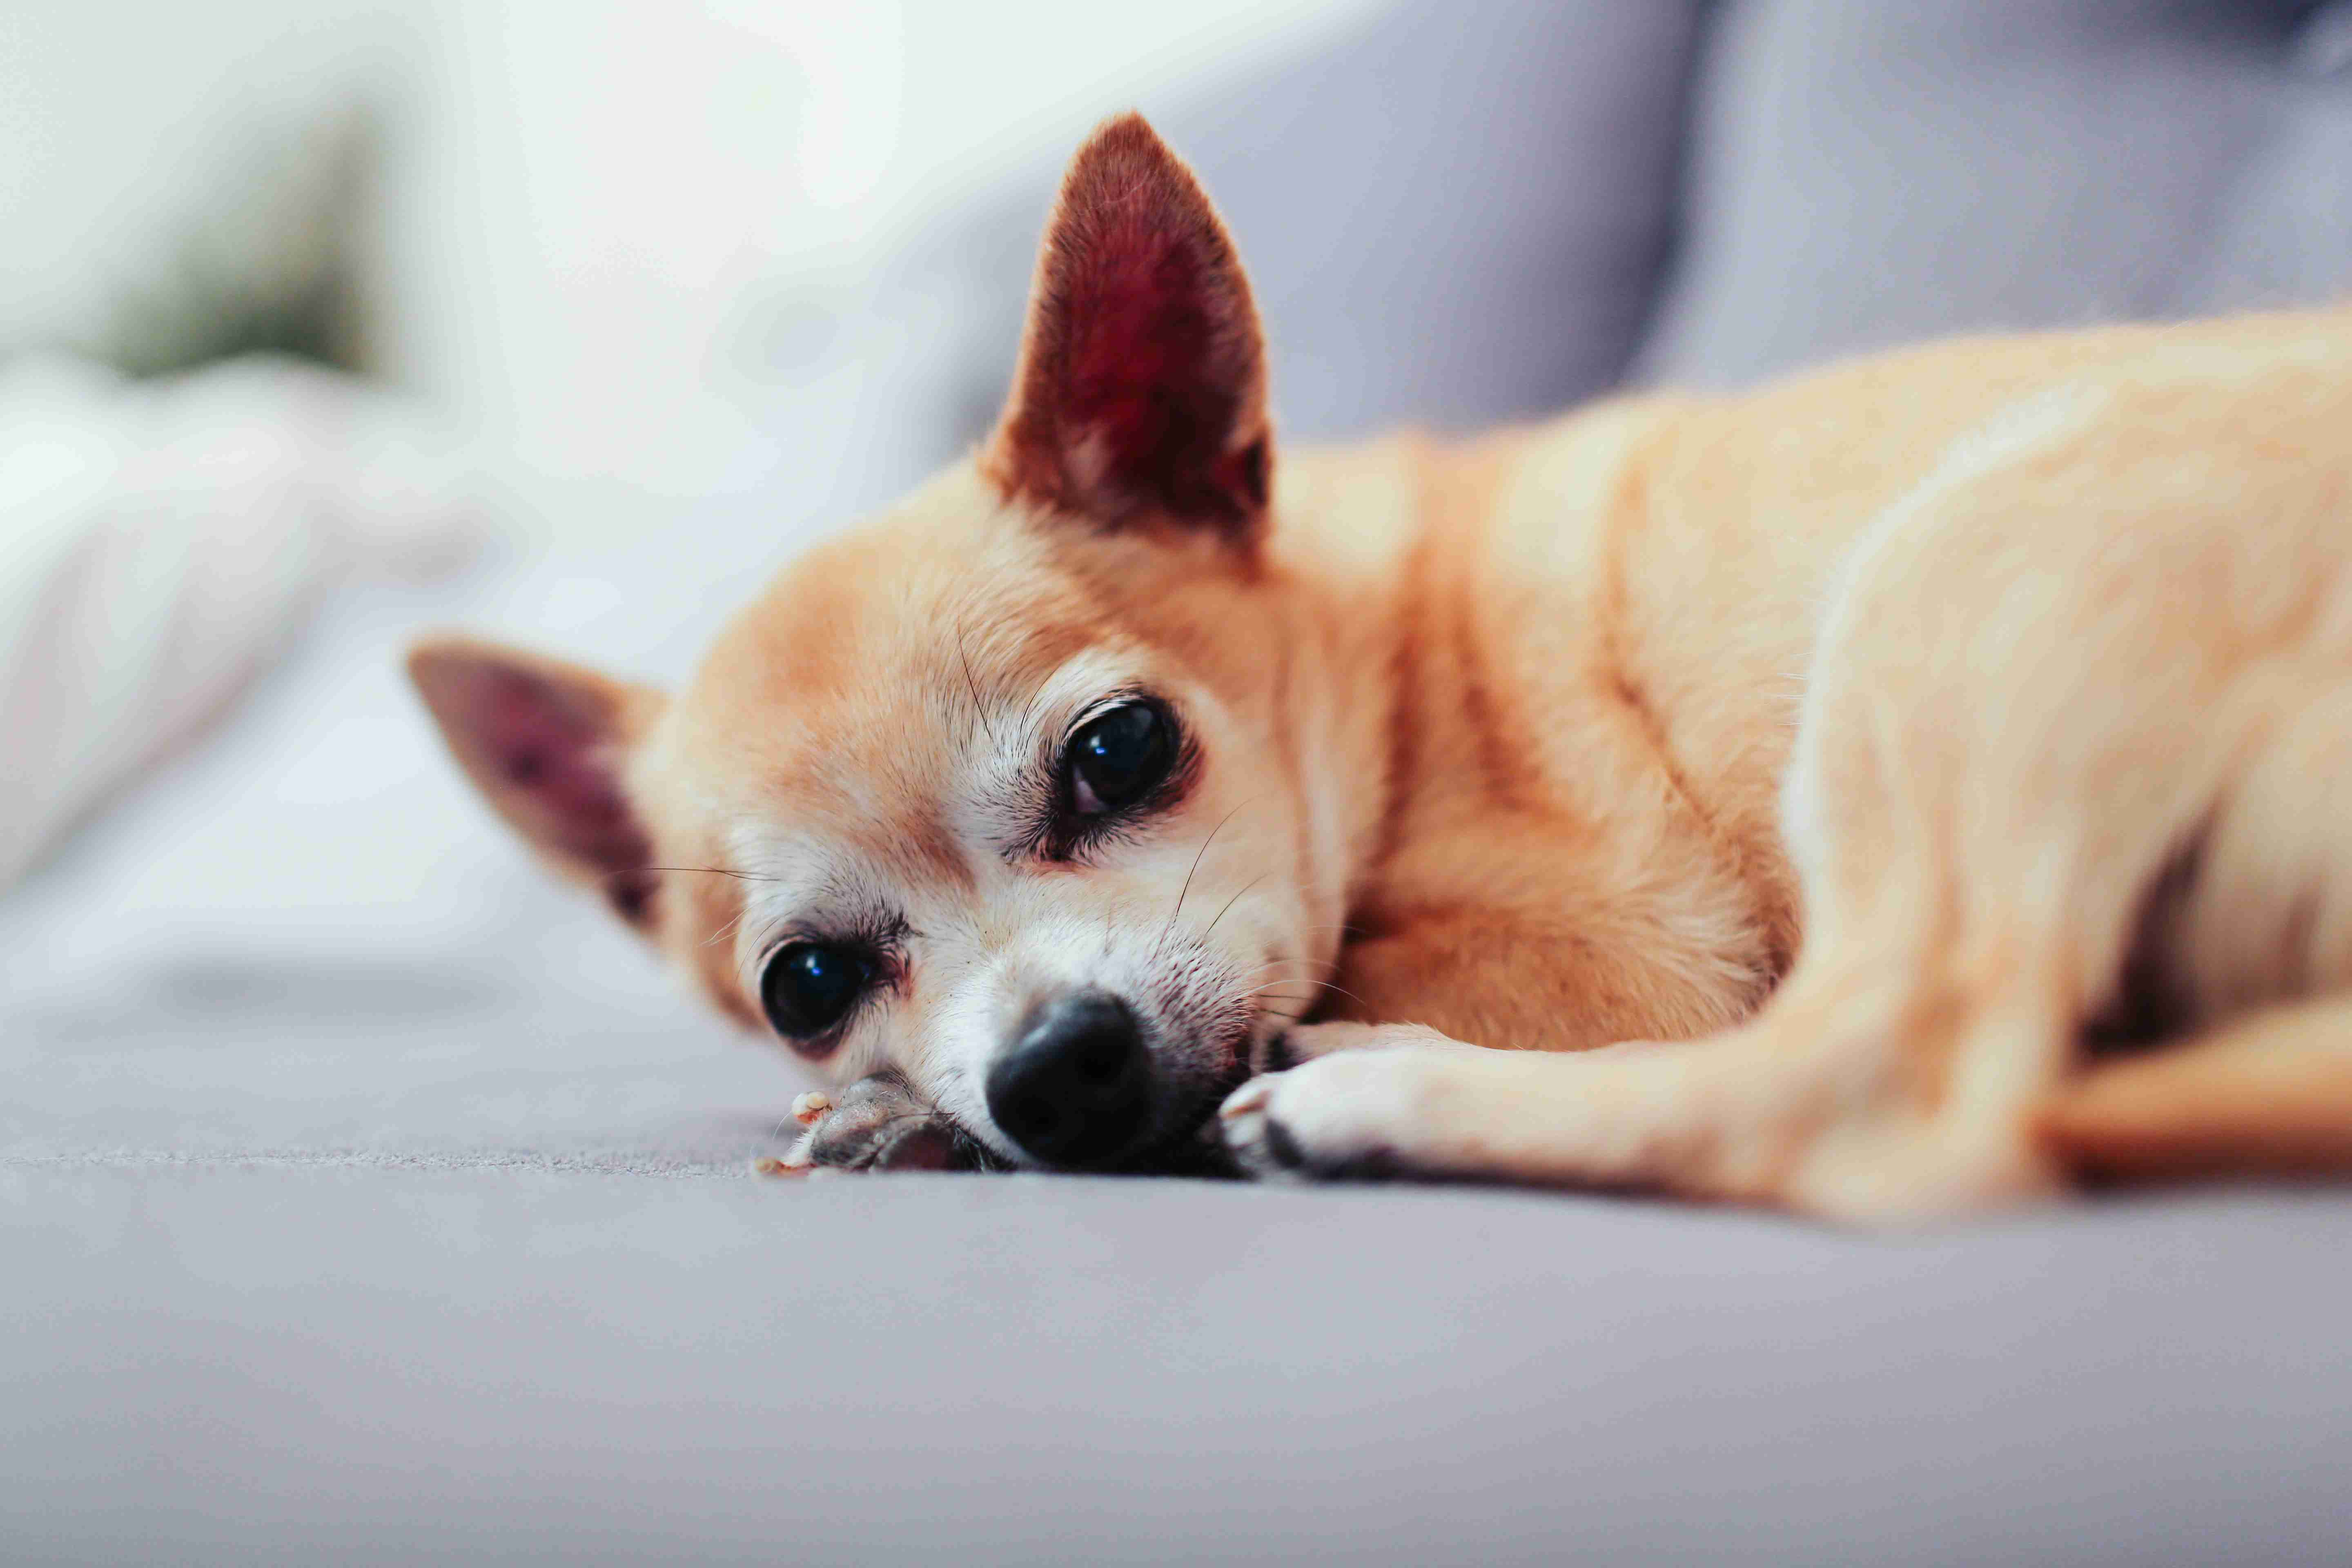 Are there any specific warning signs to look out for when a Chihuahua is about to become angry?